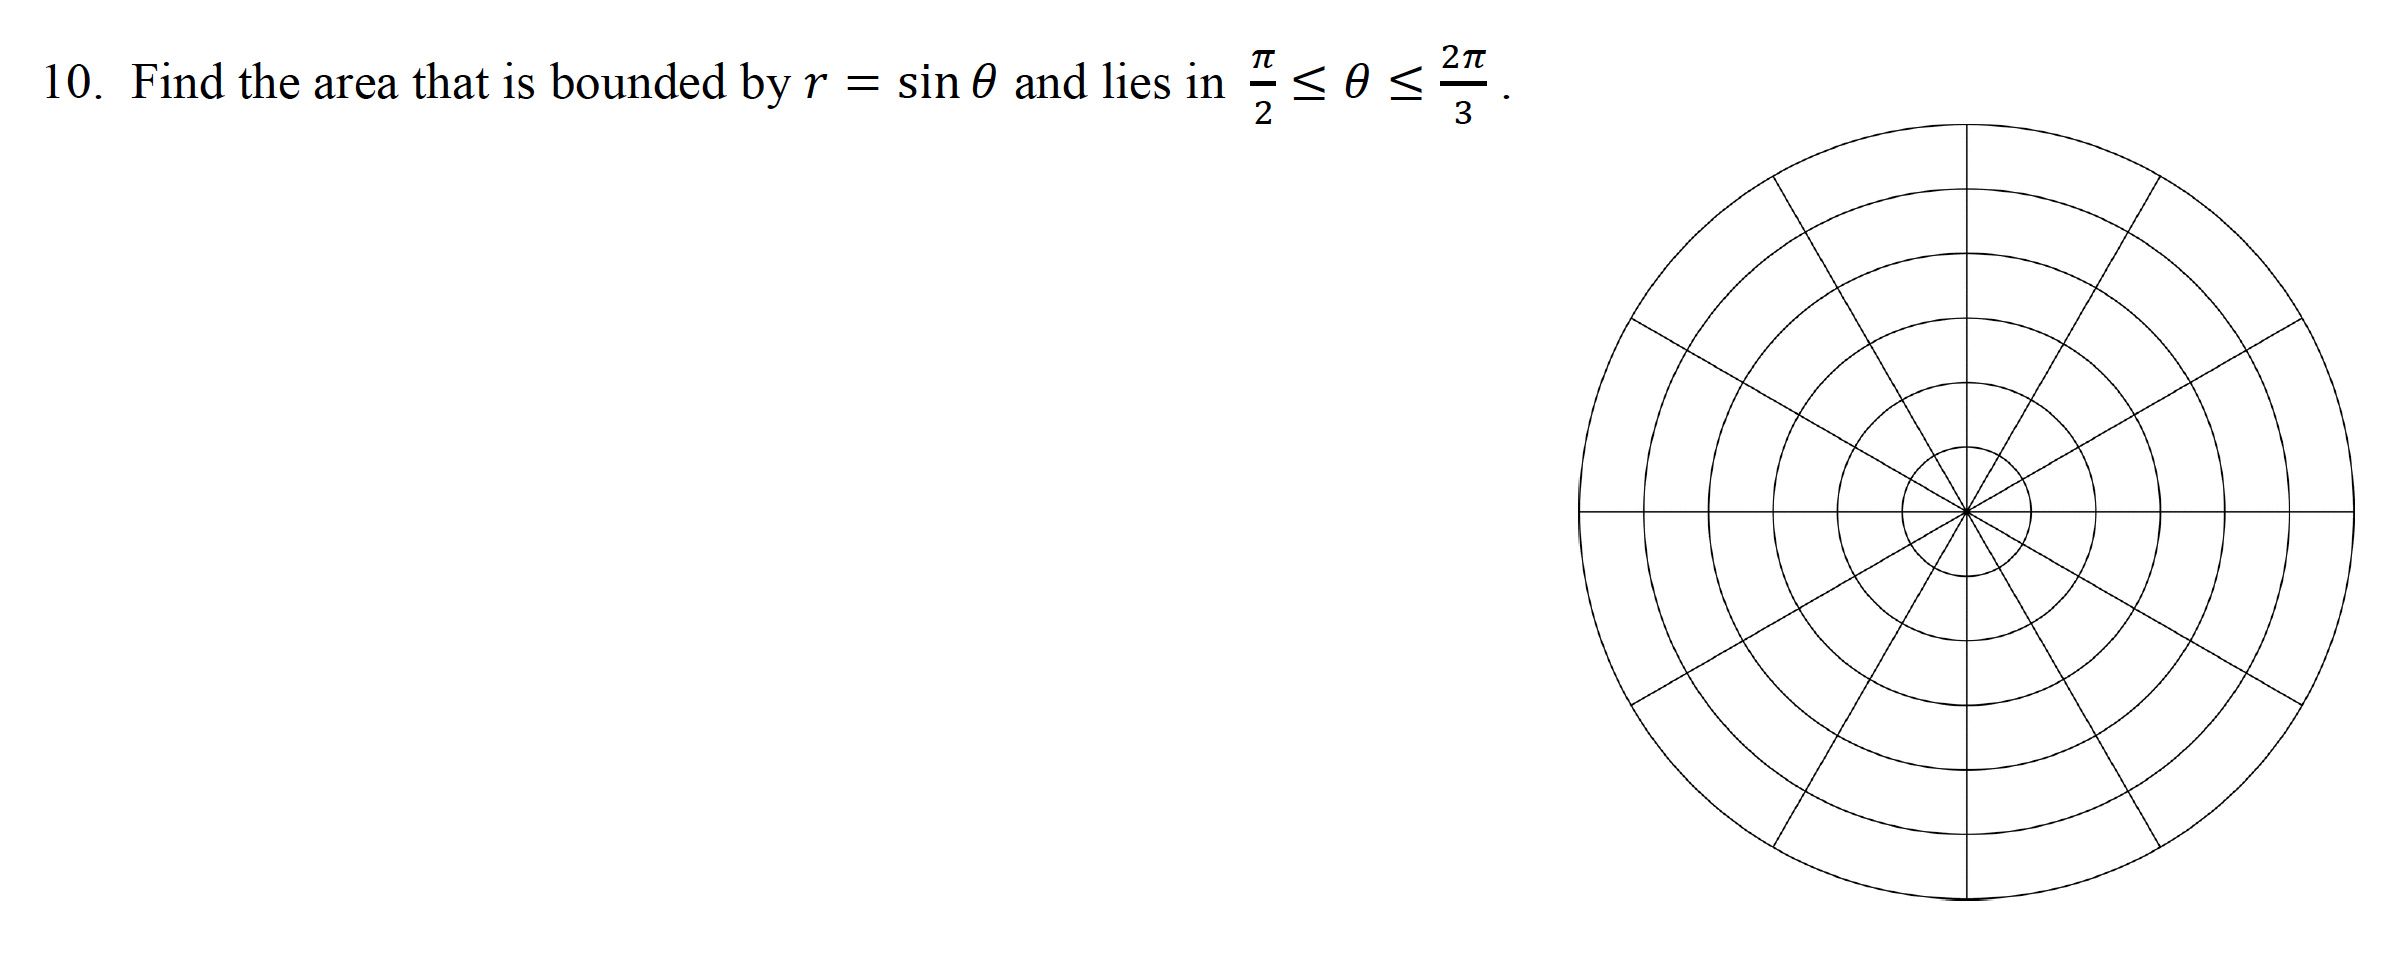 TT
10. Find the area that is bounded by r = sin 0 and lies in
2
3
